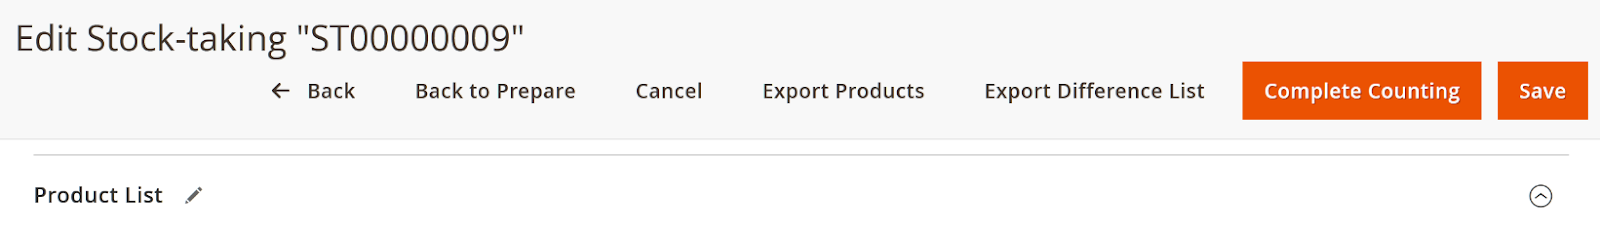 export difference list to double-check stock count.